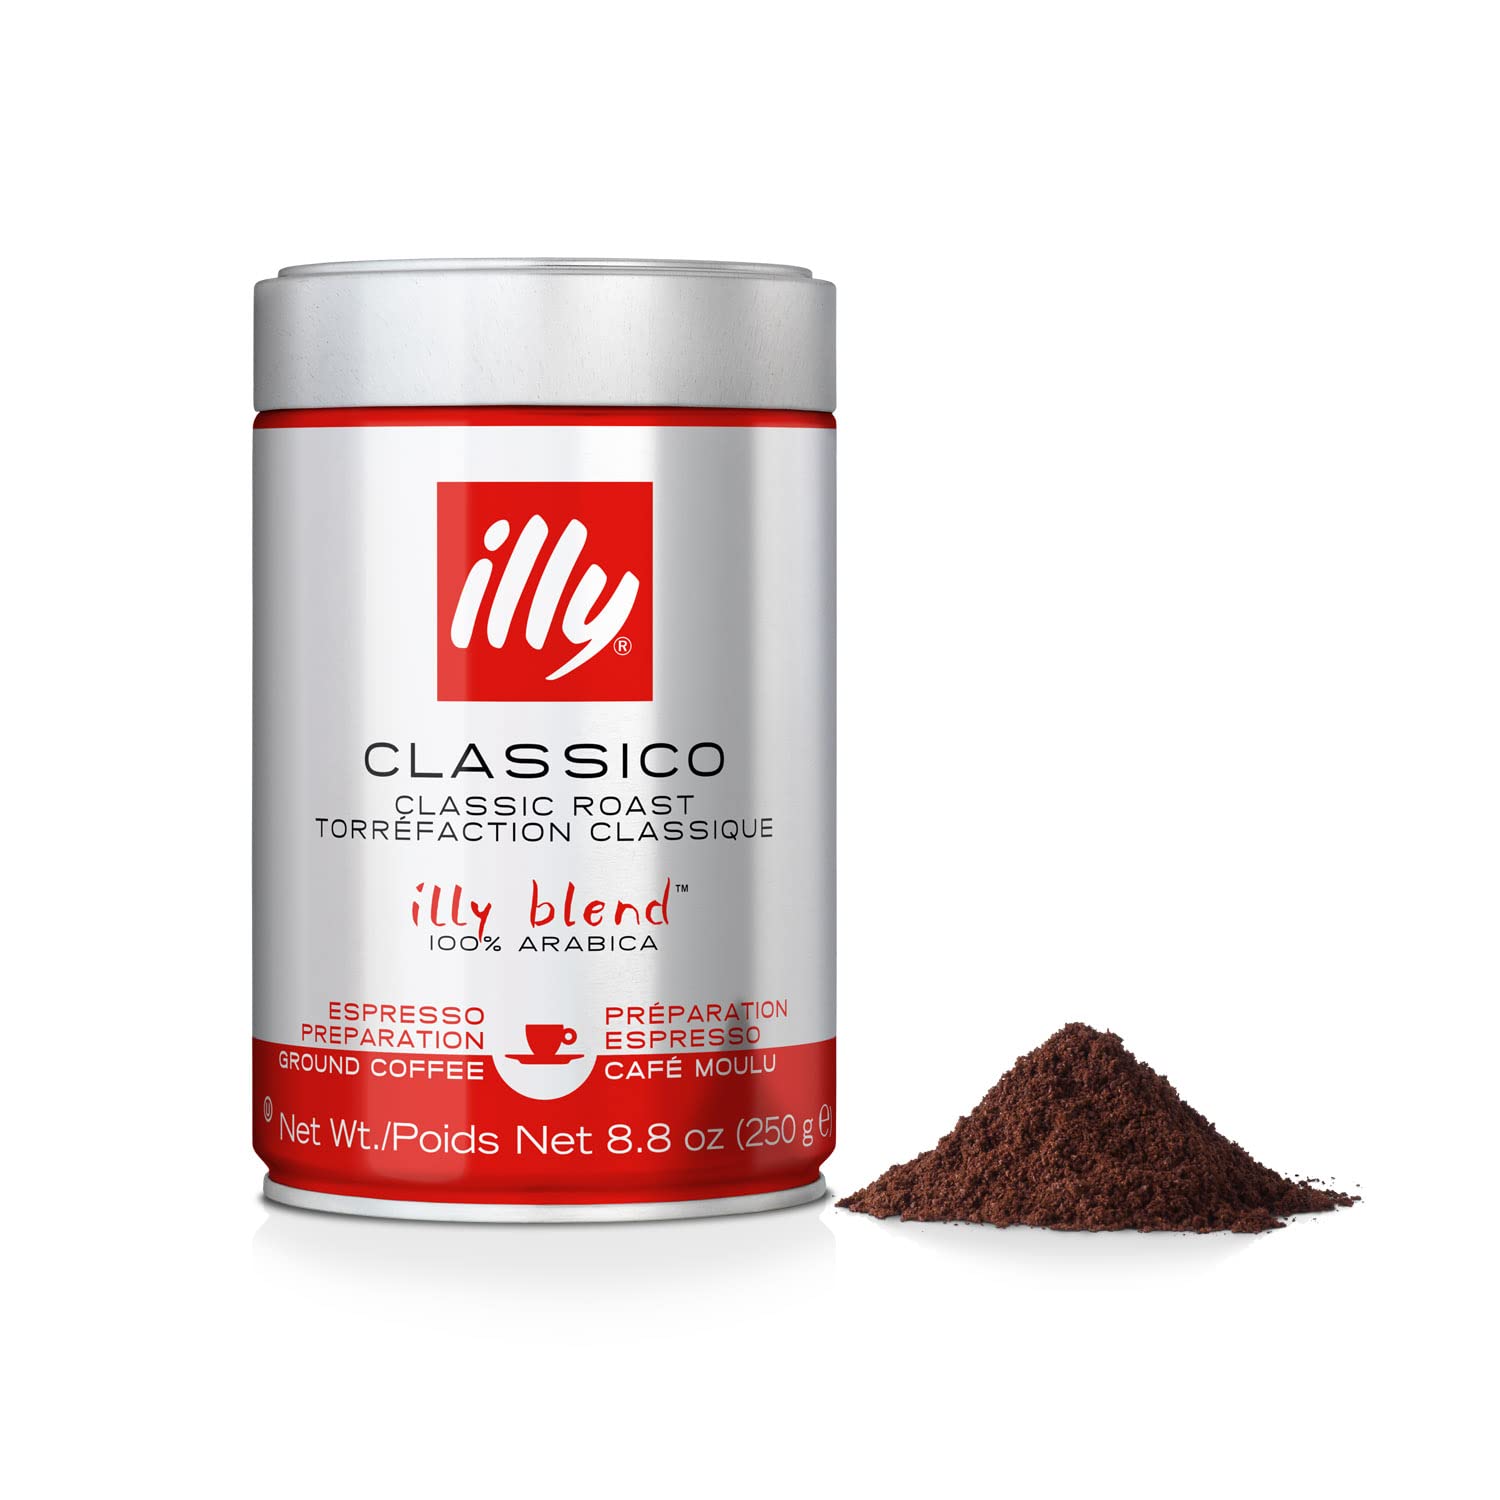 Illy Classico Espresso Ground Coffee, Medium Roast, Classic Roast with Notes of Chocolate & Caramel, 100% Arabica Coffee, All-Natural, No Preservatives,...